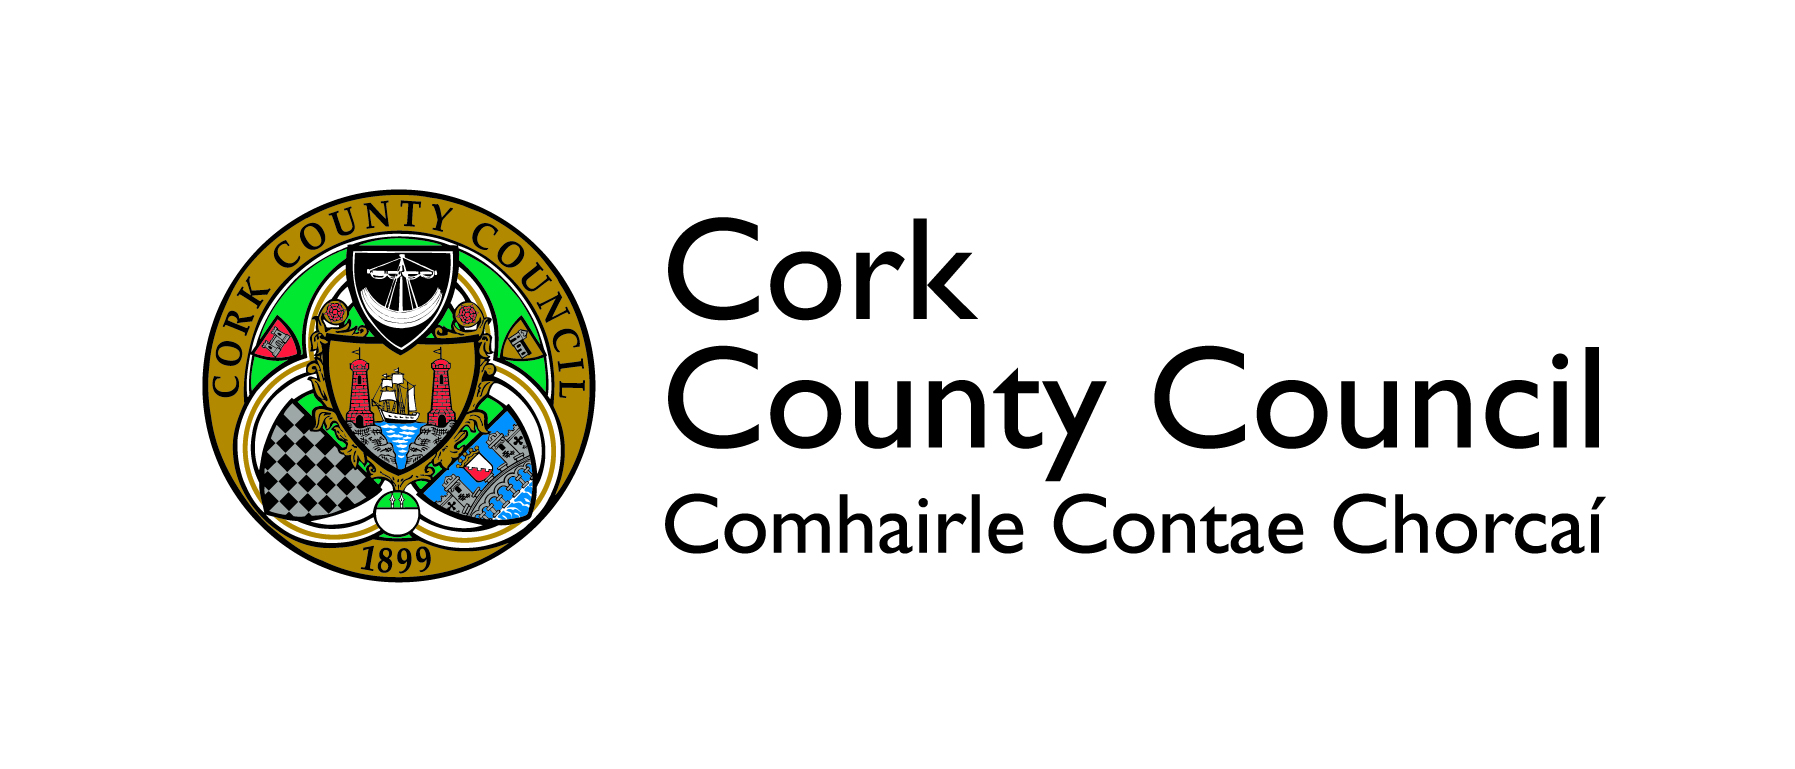 Northern Committee of Cork County Council Meeting – May 2018